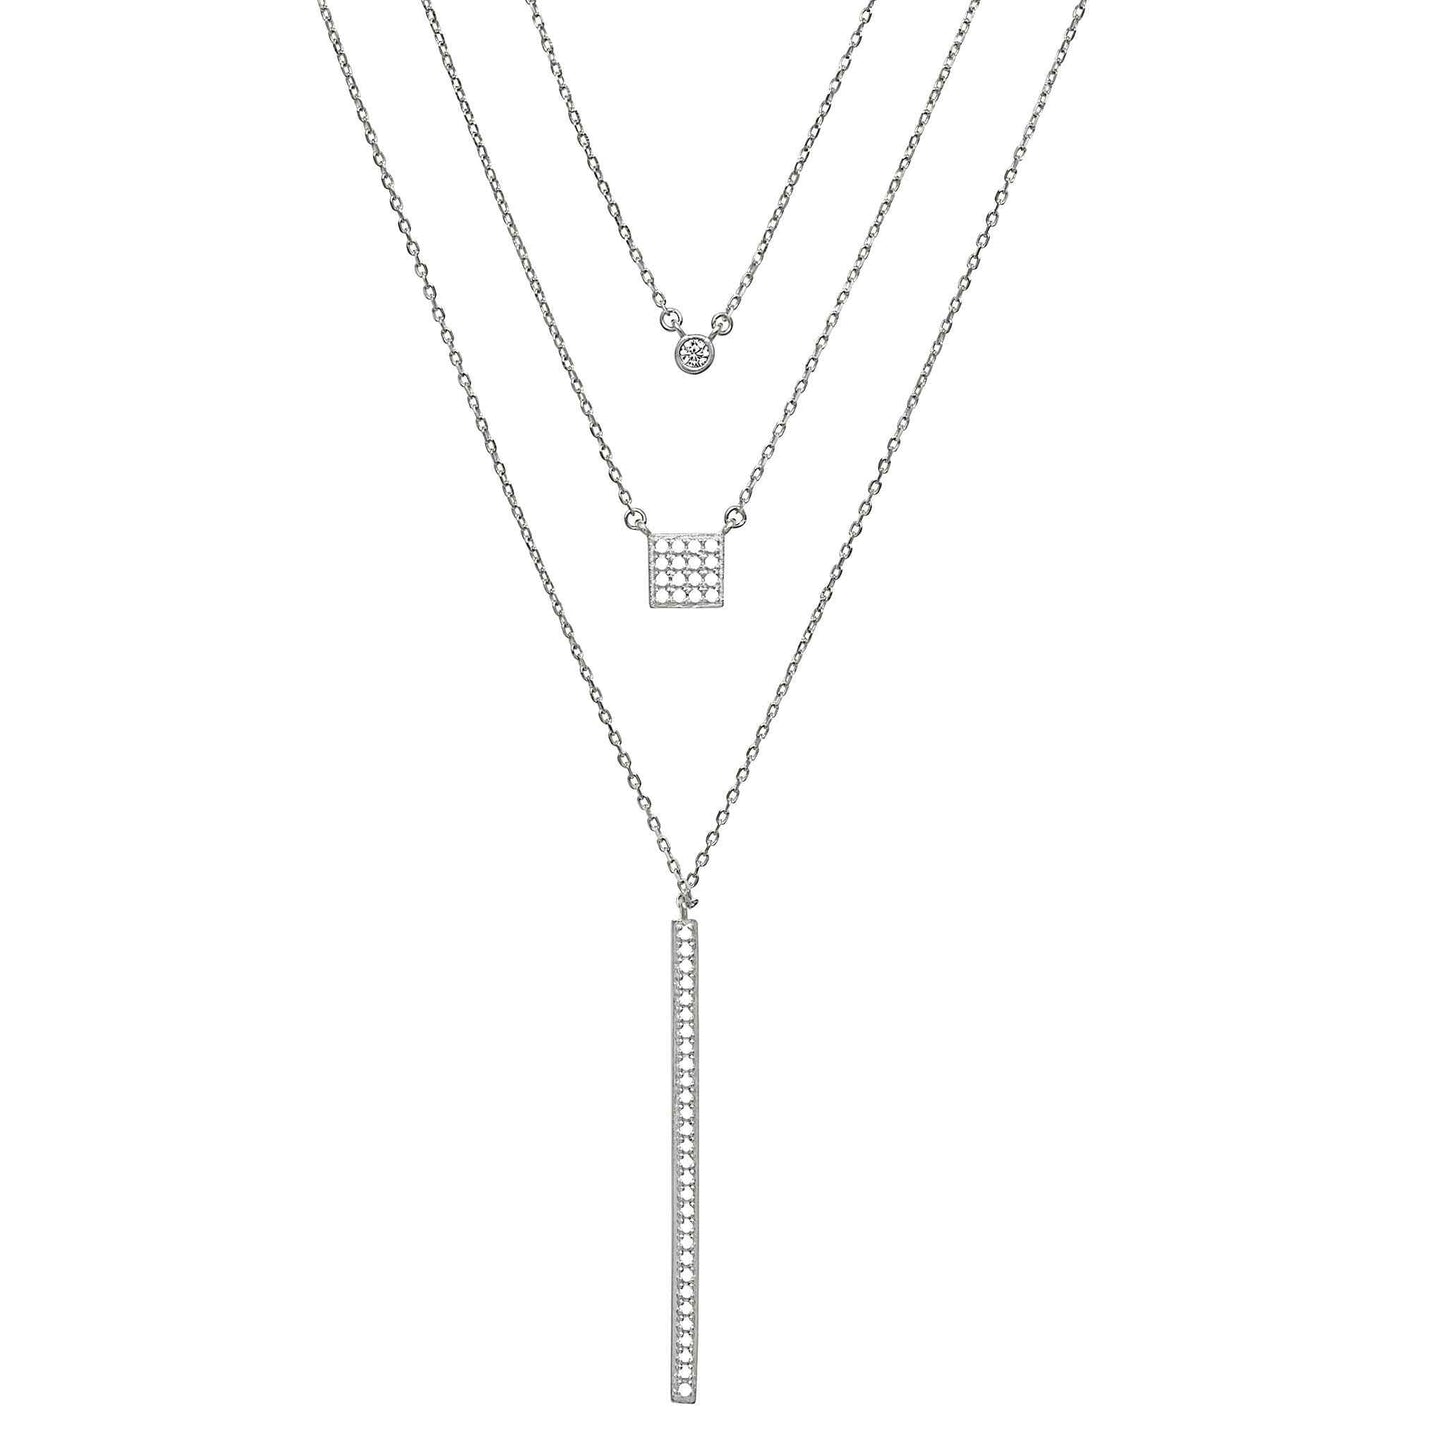 A layered sterling silver necklace with simulated diamonds displayed on a neutral white background.